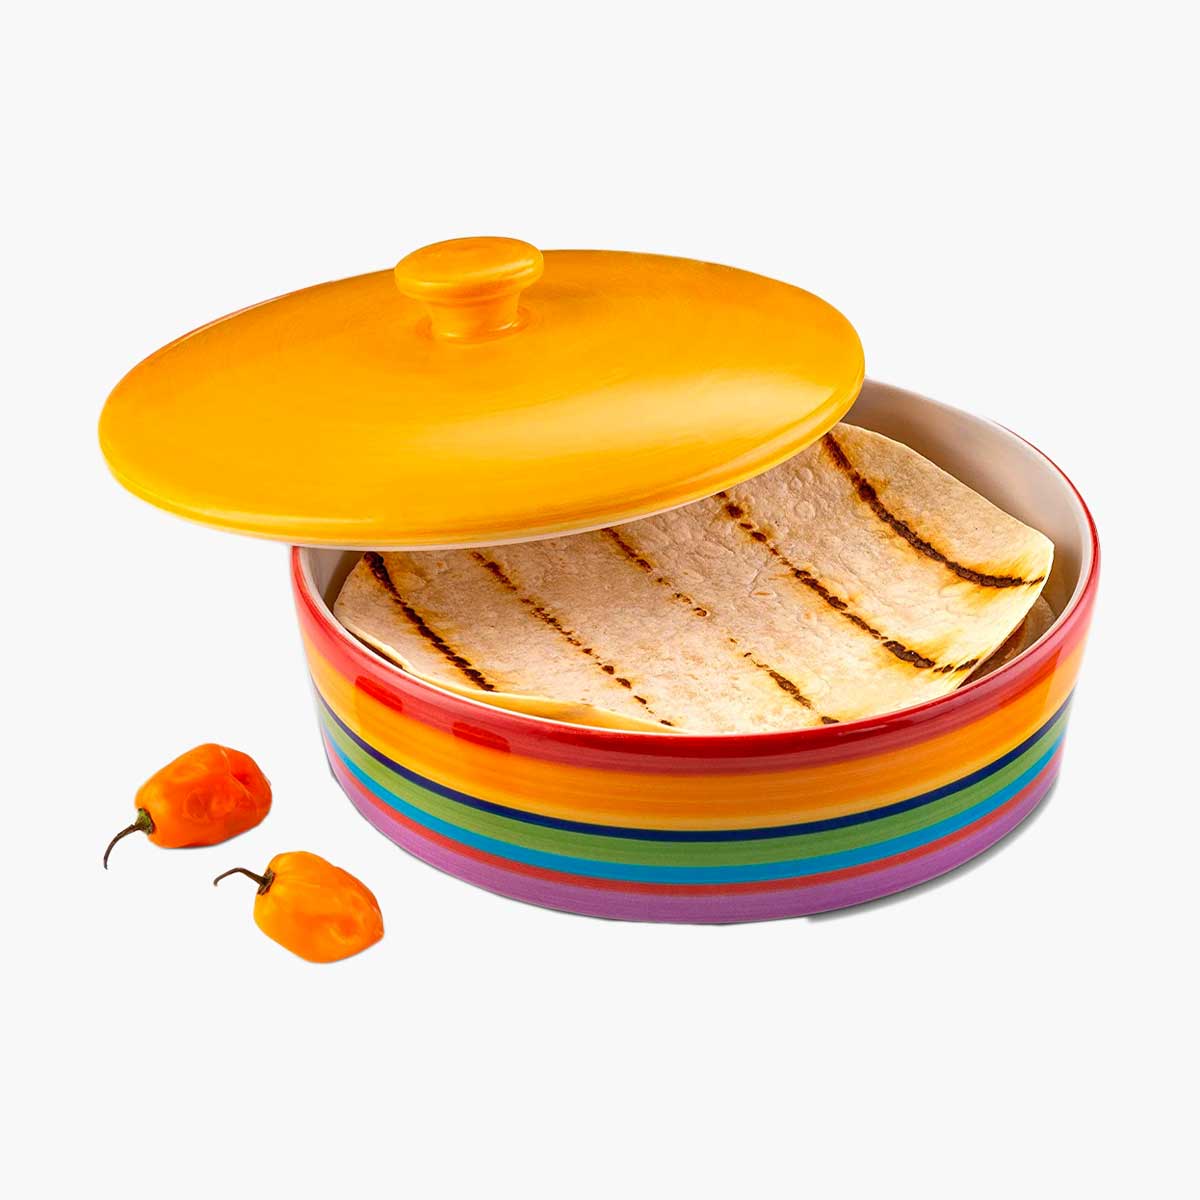 A striped colorful tortilla warmer with peppers on the side, one of the items for everything you could possibly need for taco night at home.